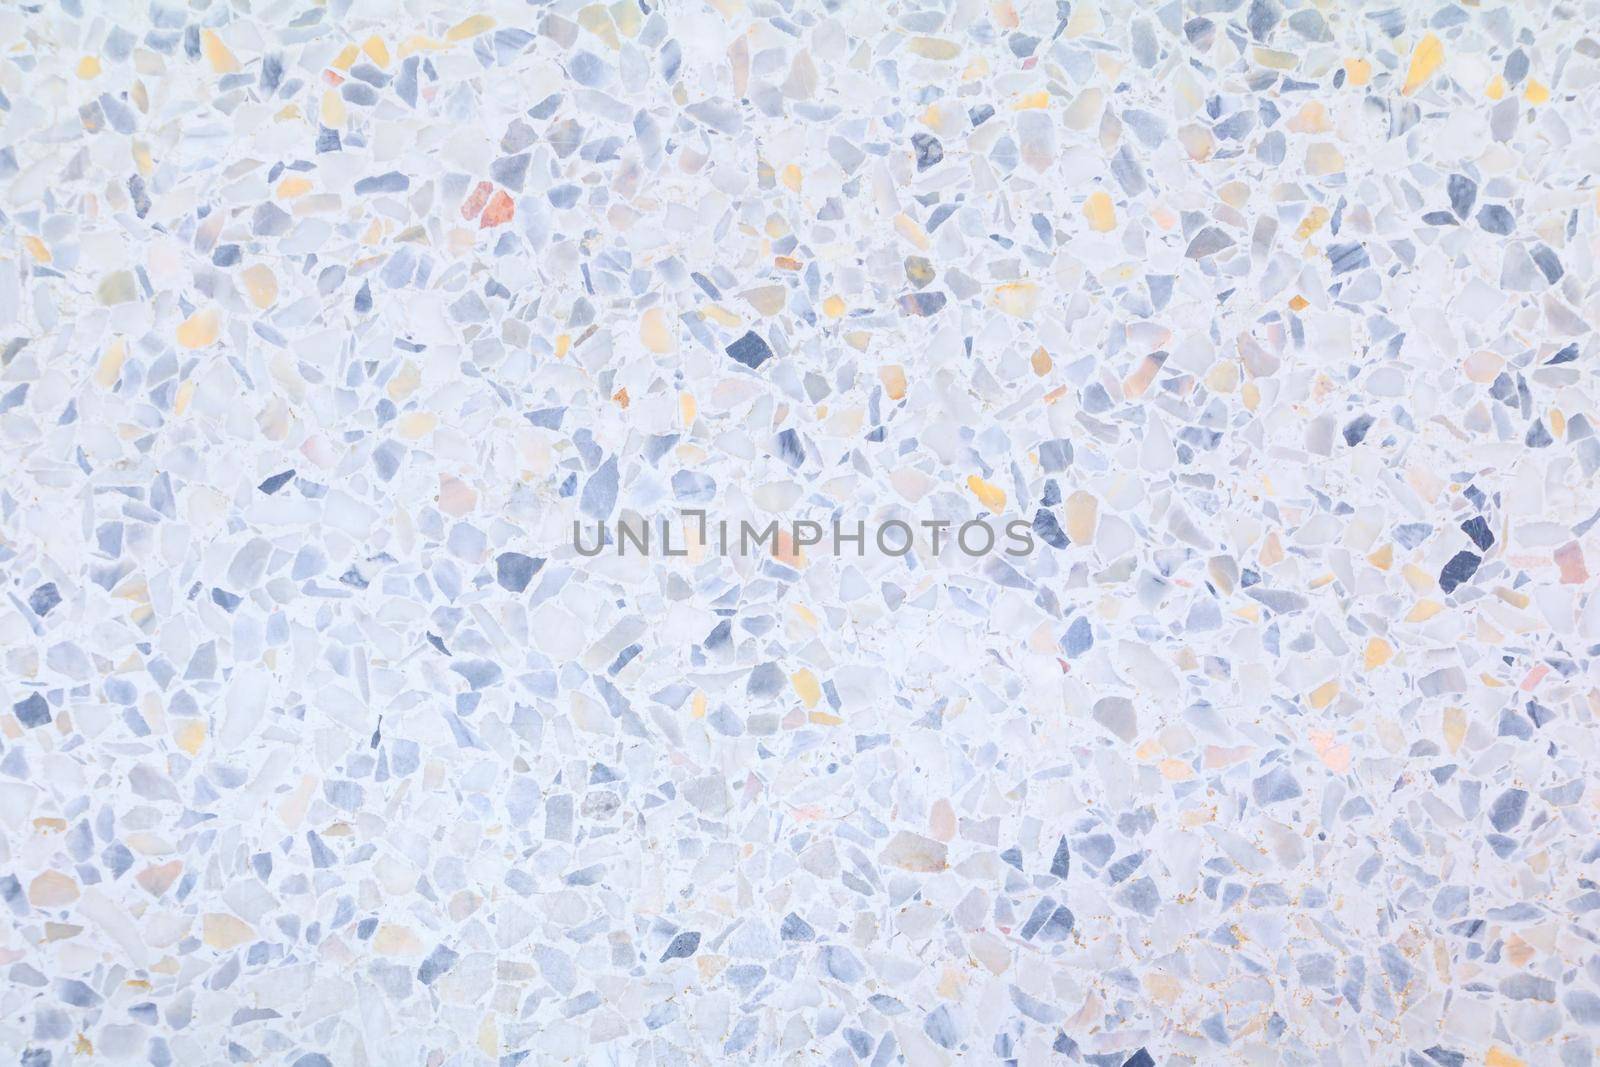 terrazzo flooring texture polished stone pattern wall and color old surface marble for background image horizontal by pramot